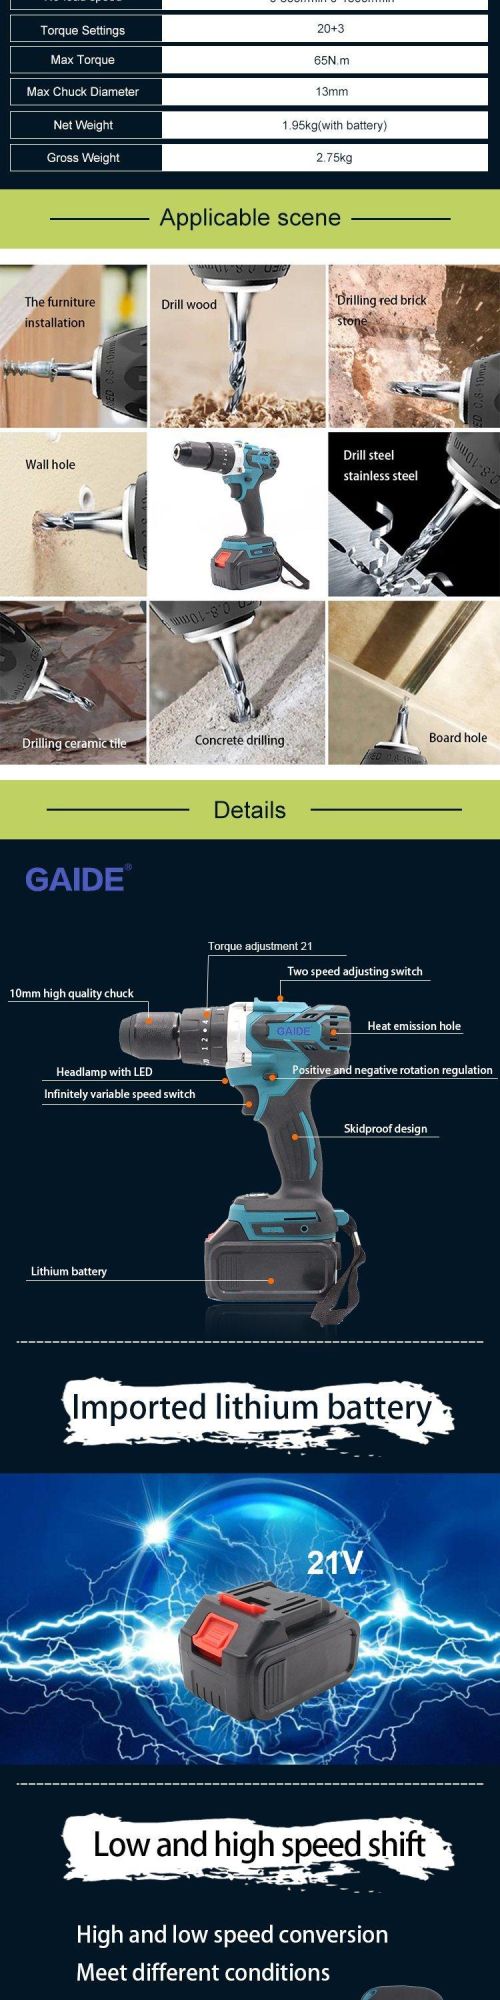 Gadie Brushless Motor Rechargeable Battery 21V Impact Heavy Duty Cordless Drill